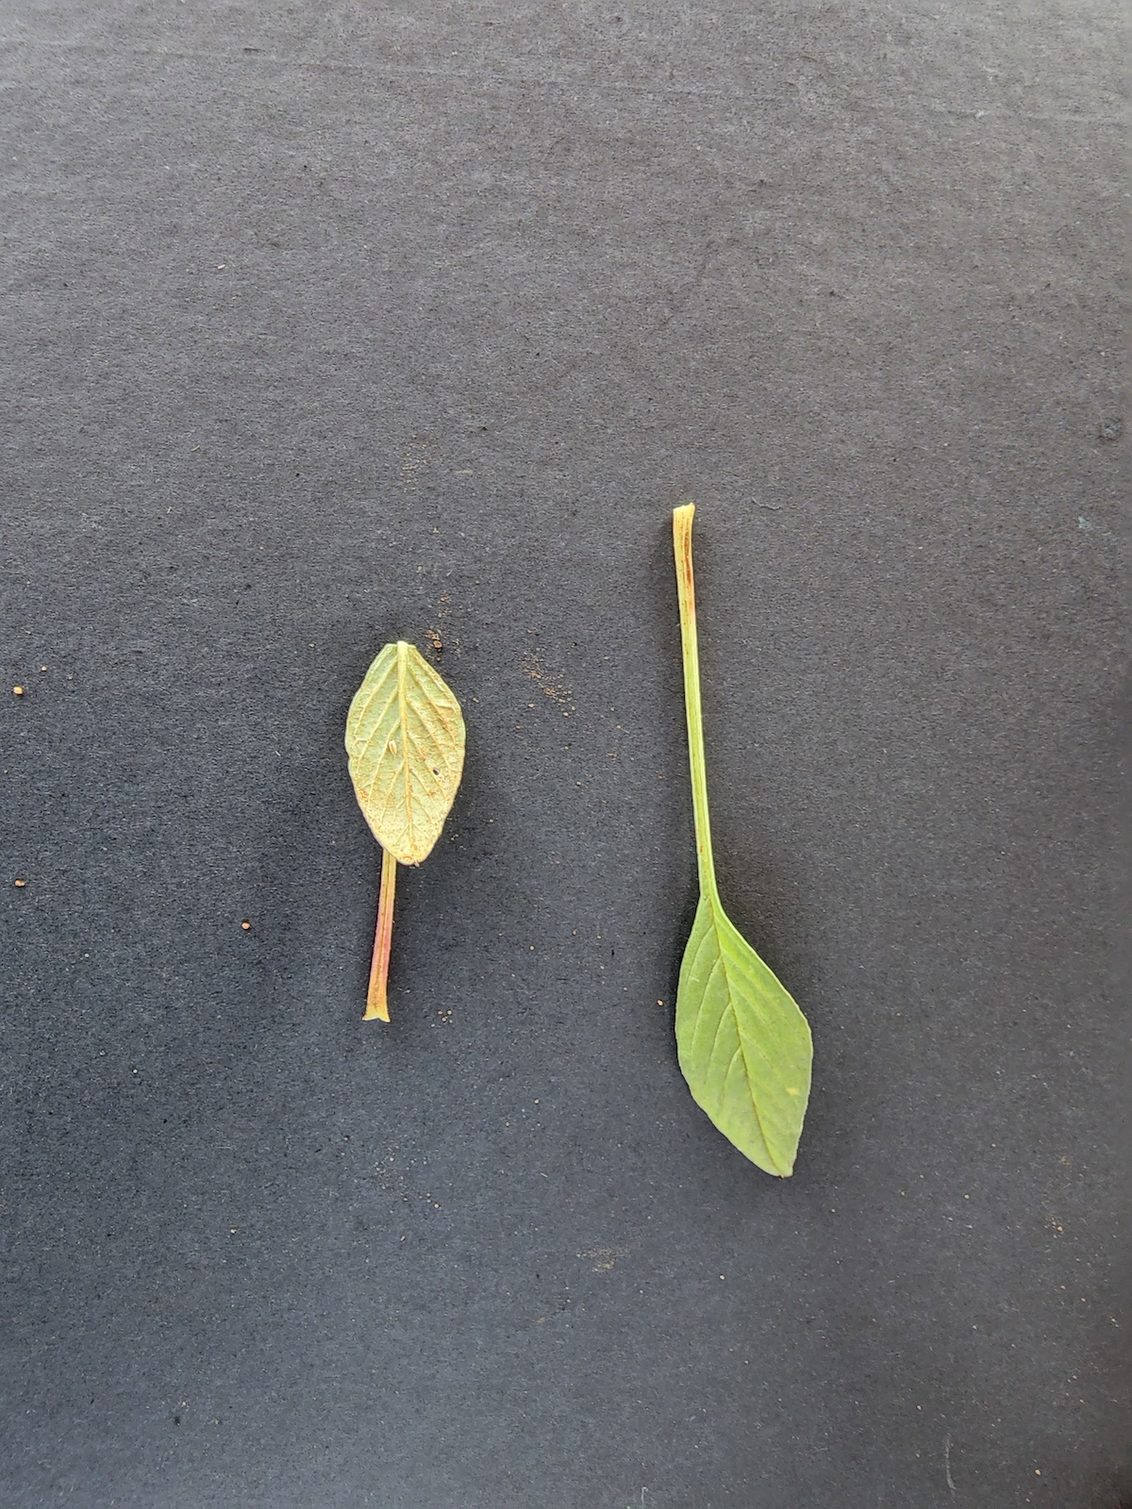 A characteristic of Palmer amaranth is that the leaf petiole is longer than the leaf blade. To make sure,   fold the leaf over